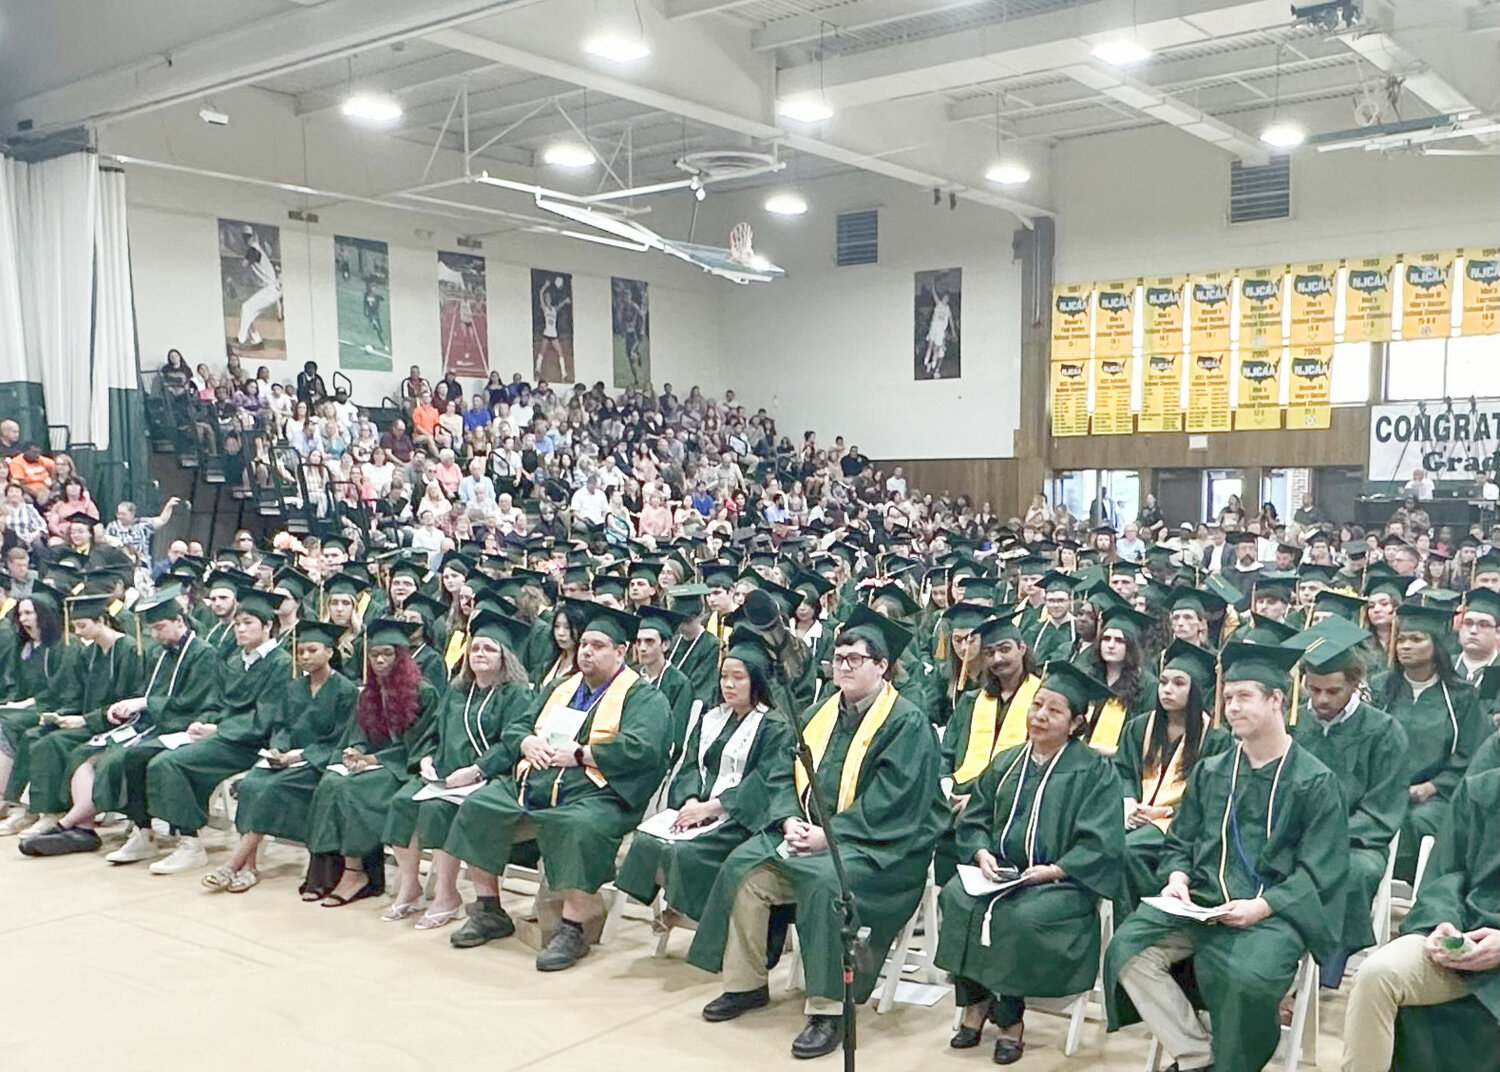 Herkimer College’s 55th commencement Friday, May 12 presented diplomas and certificates to 371 new graduates.